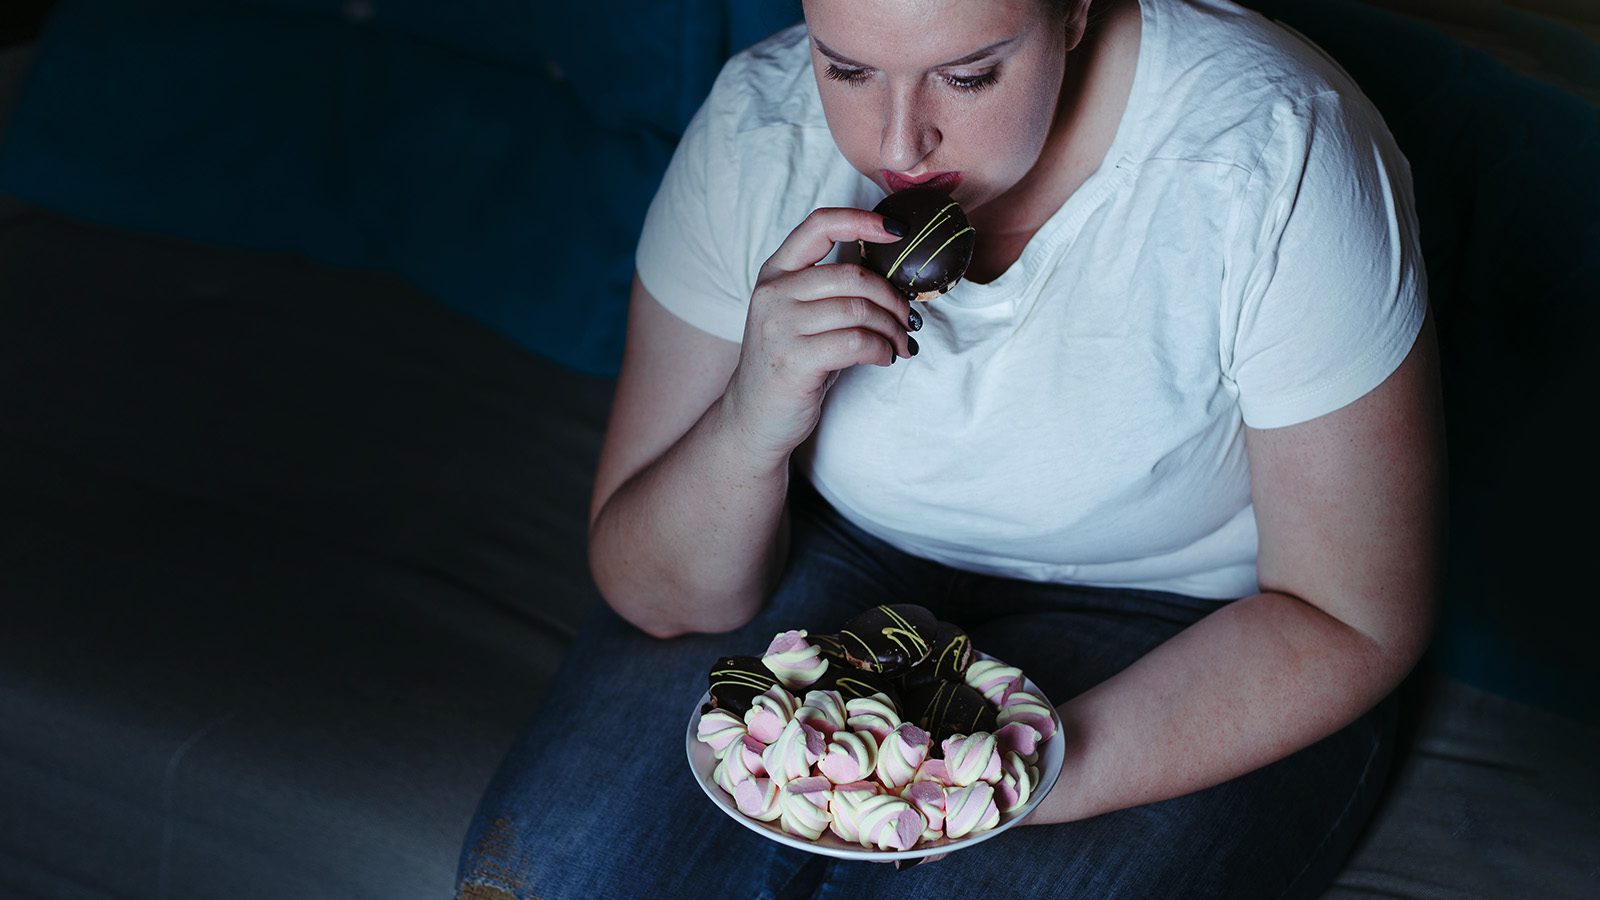 10 Signs of Emotional Eating (and How to Fix It)